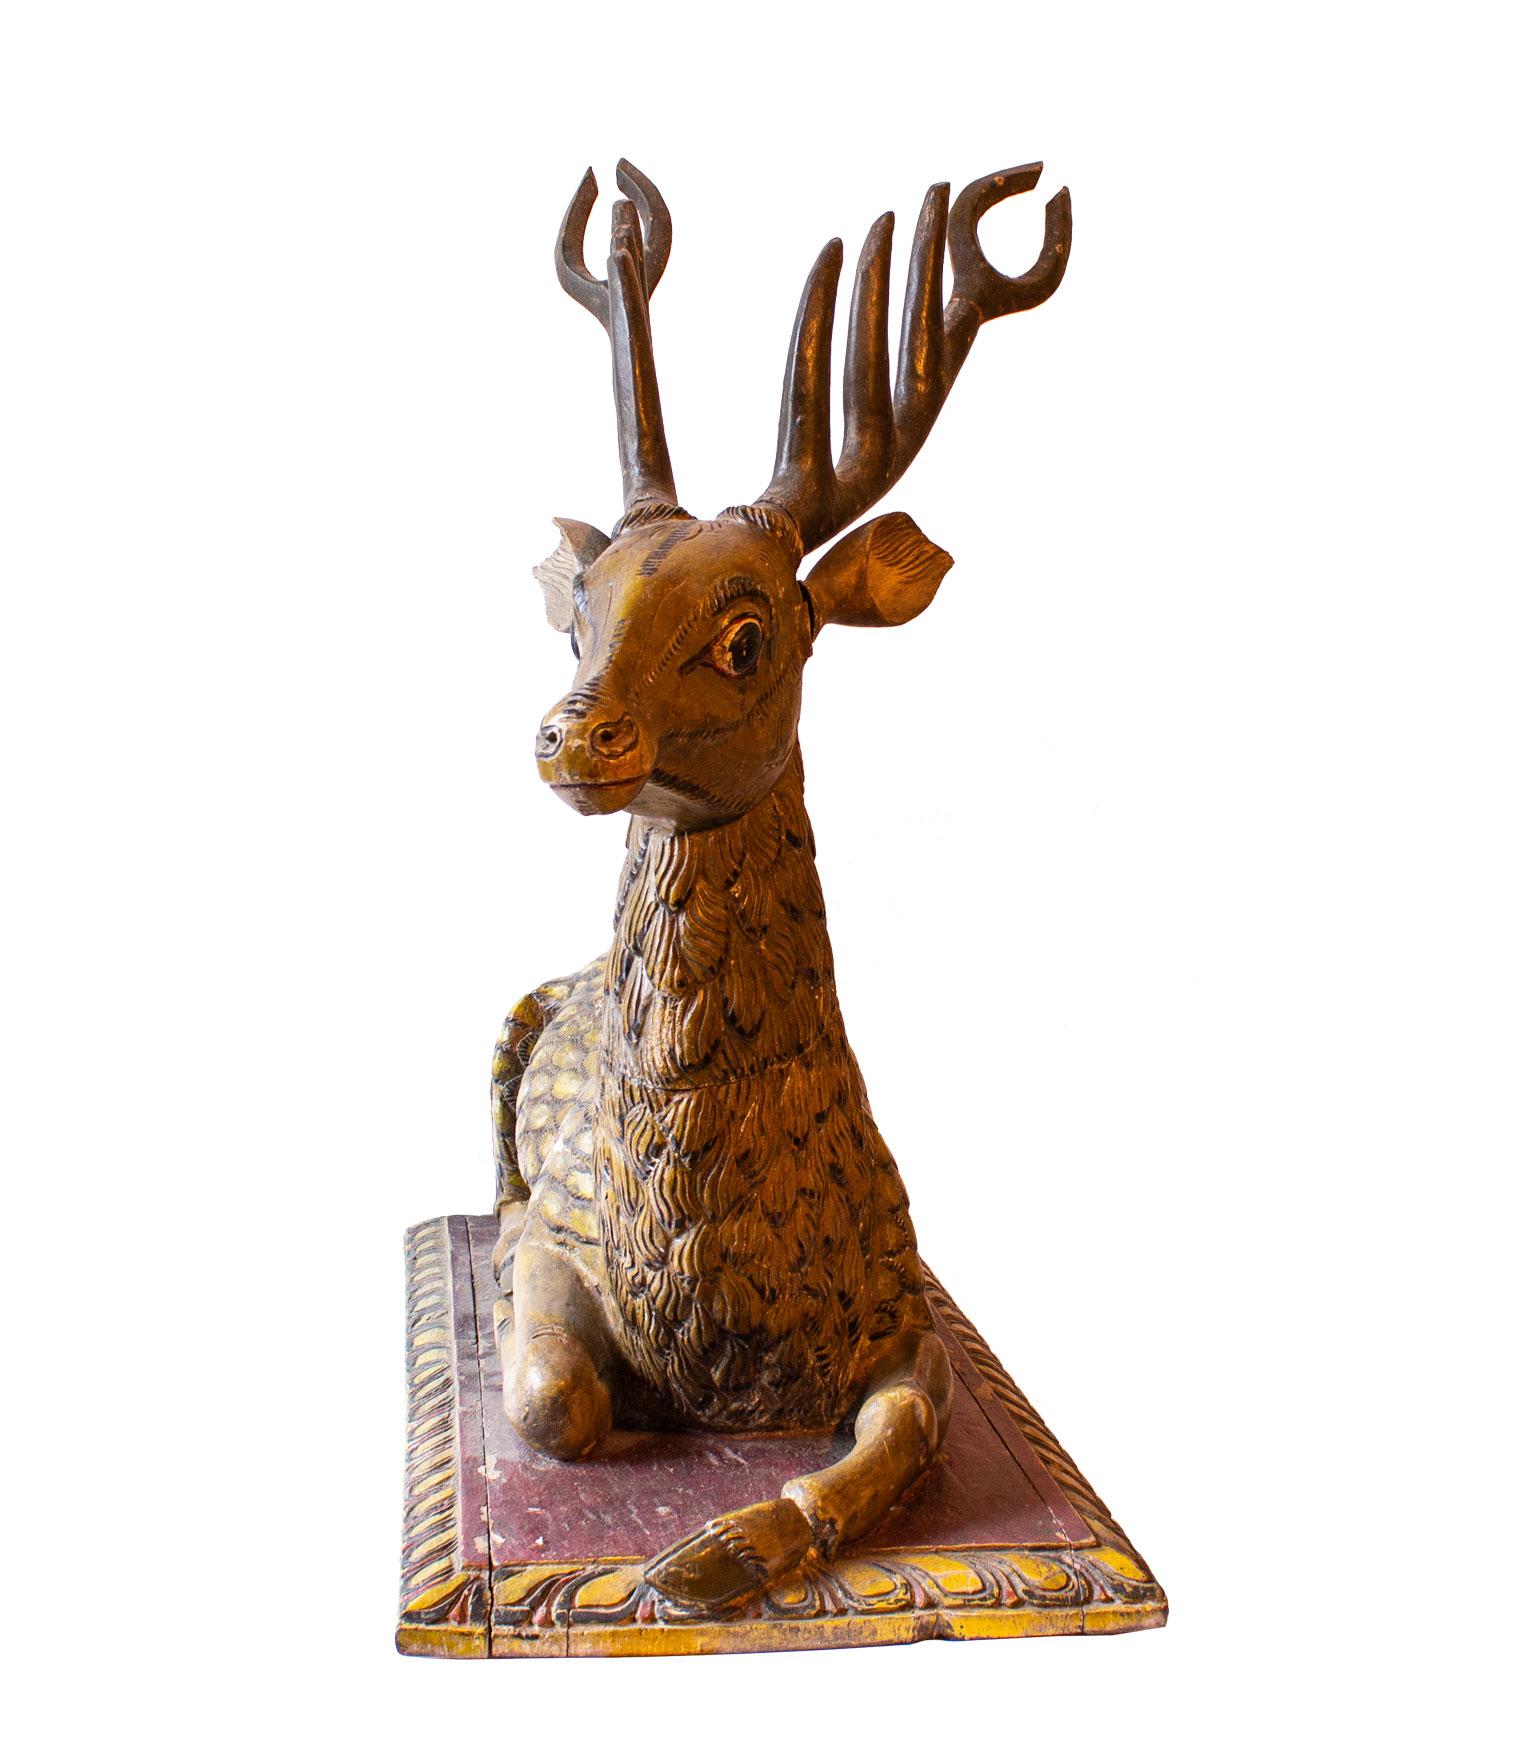 Arts and Crafts Big Hand Carved Painted Stag Sculpture in Wood, Early 1800th Century